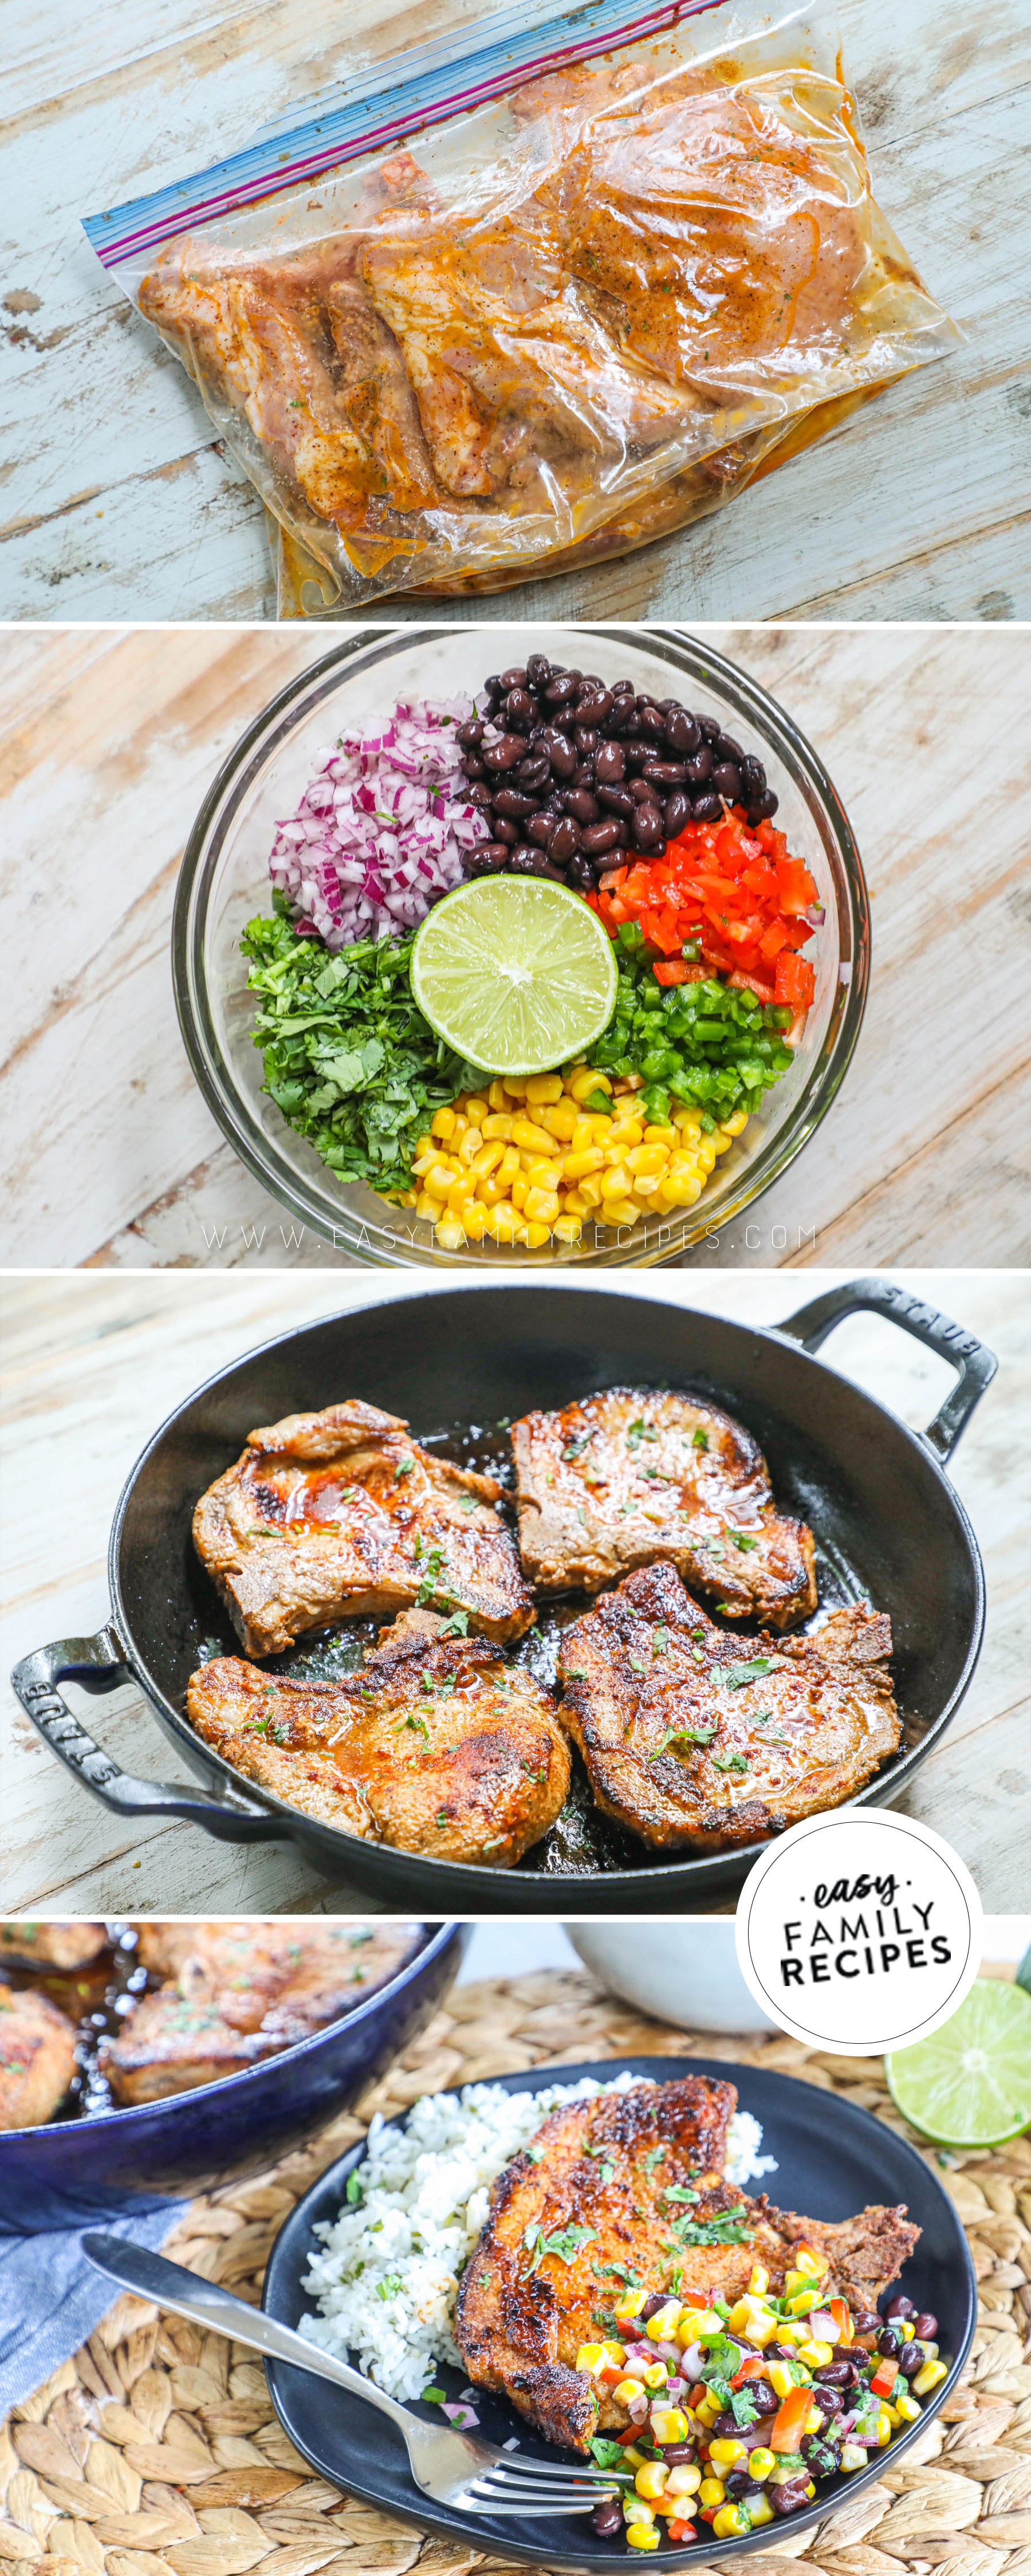 4 image collage on how to marinate pork chops in a bag, an image of salsa ingredients, the pork chops being pan seared in a skillet, and the recipe on a serving plate